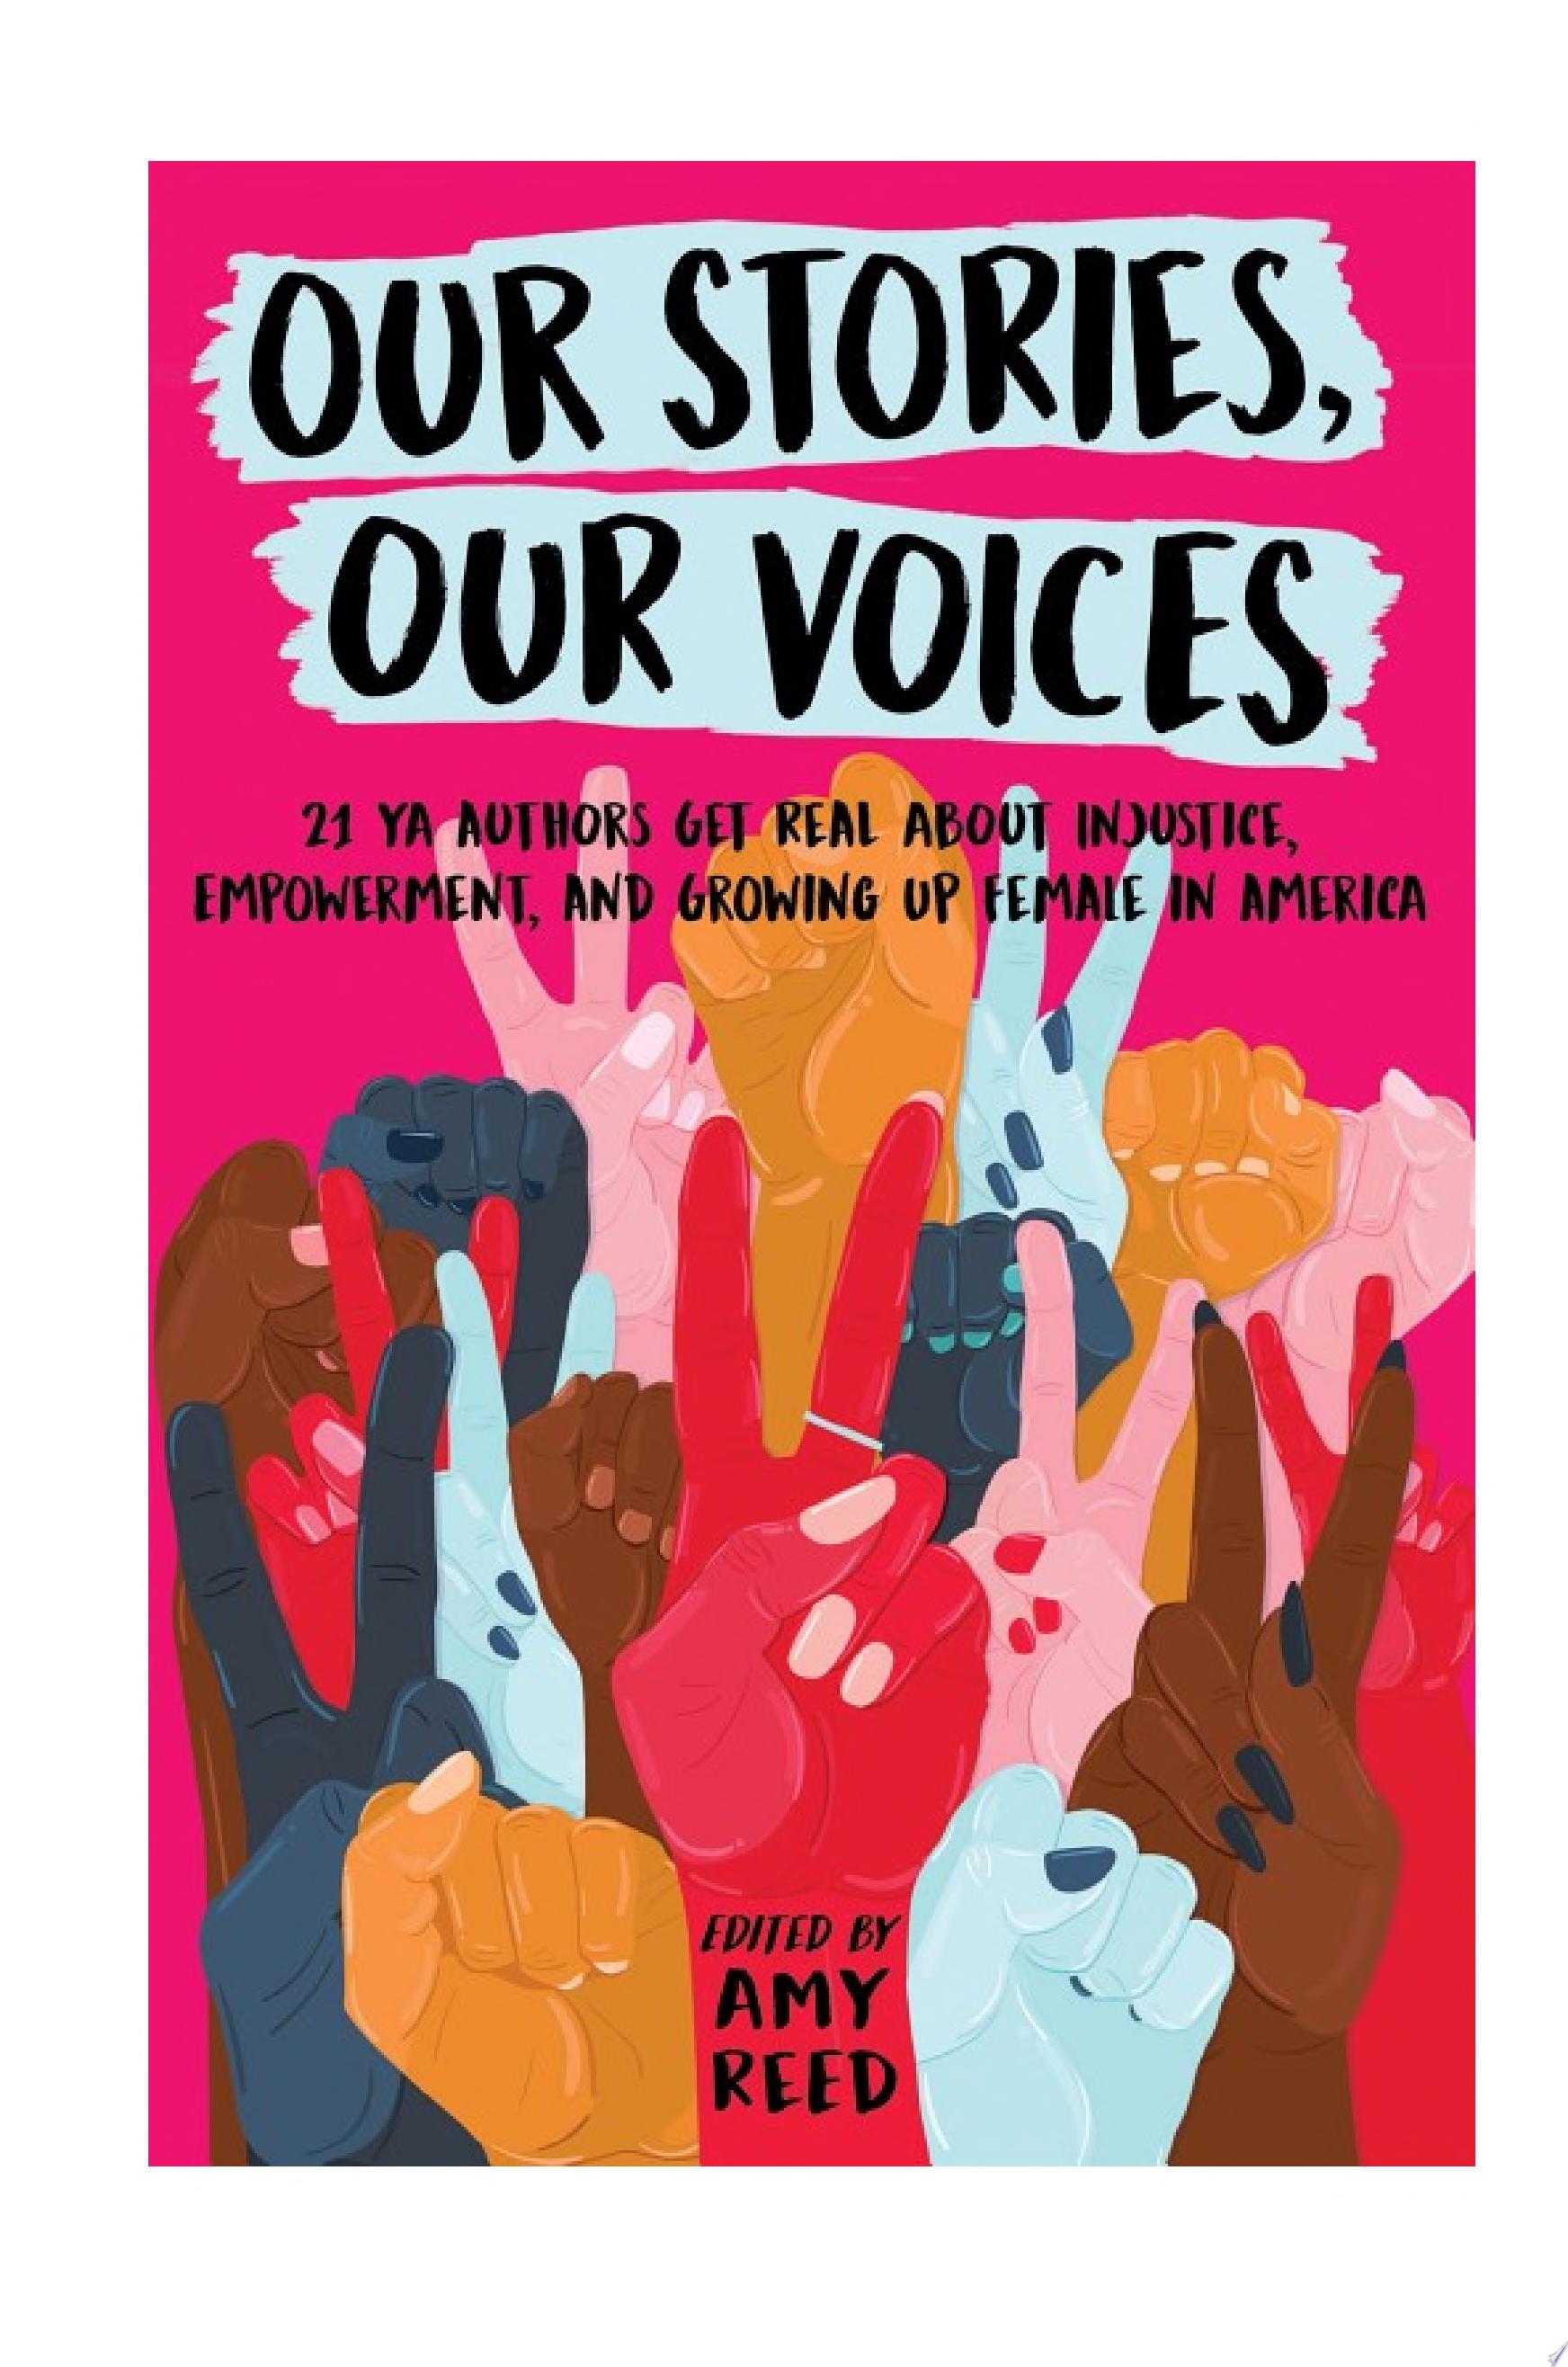 Image for "Our Stories, Our Voices"